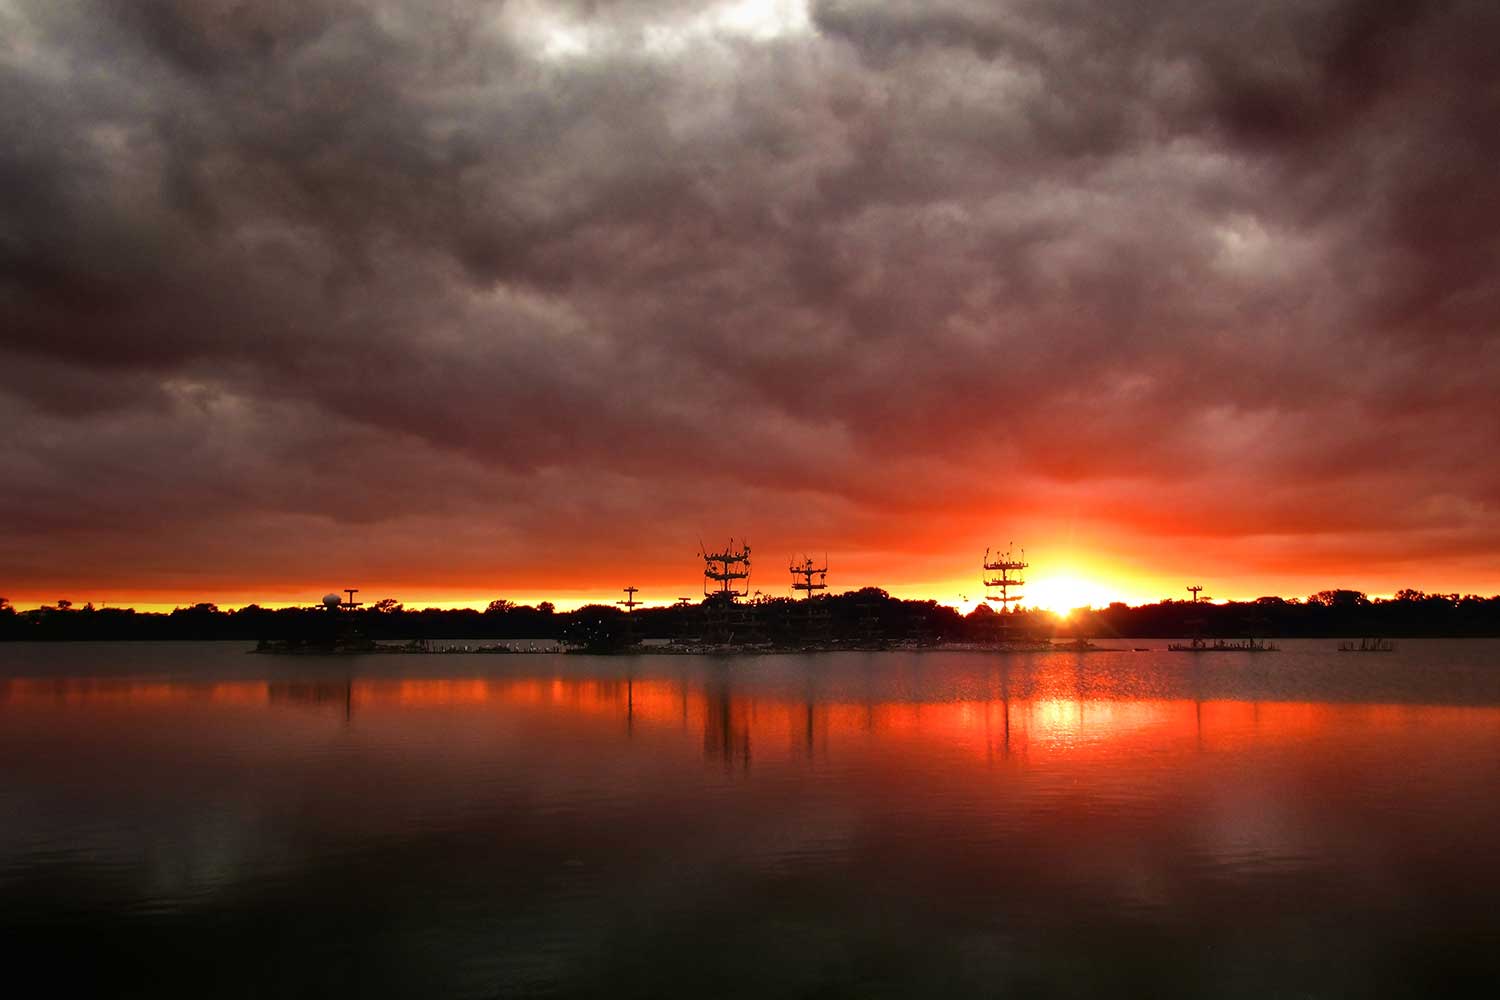 An orange and red sky as the sun sets behind a lake with nesting platforms visible in the distance.